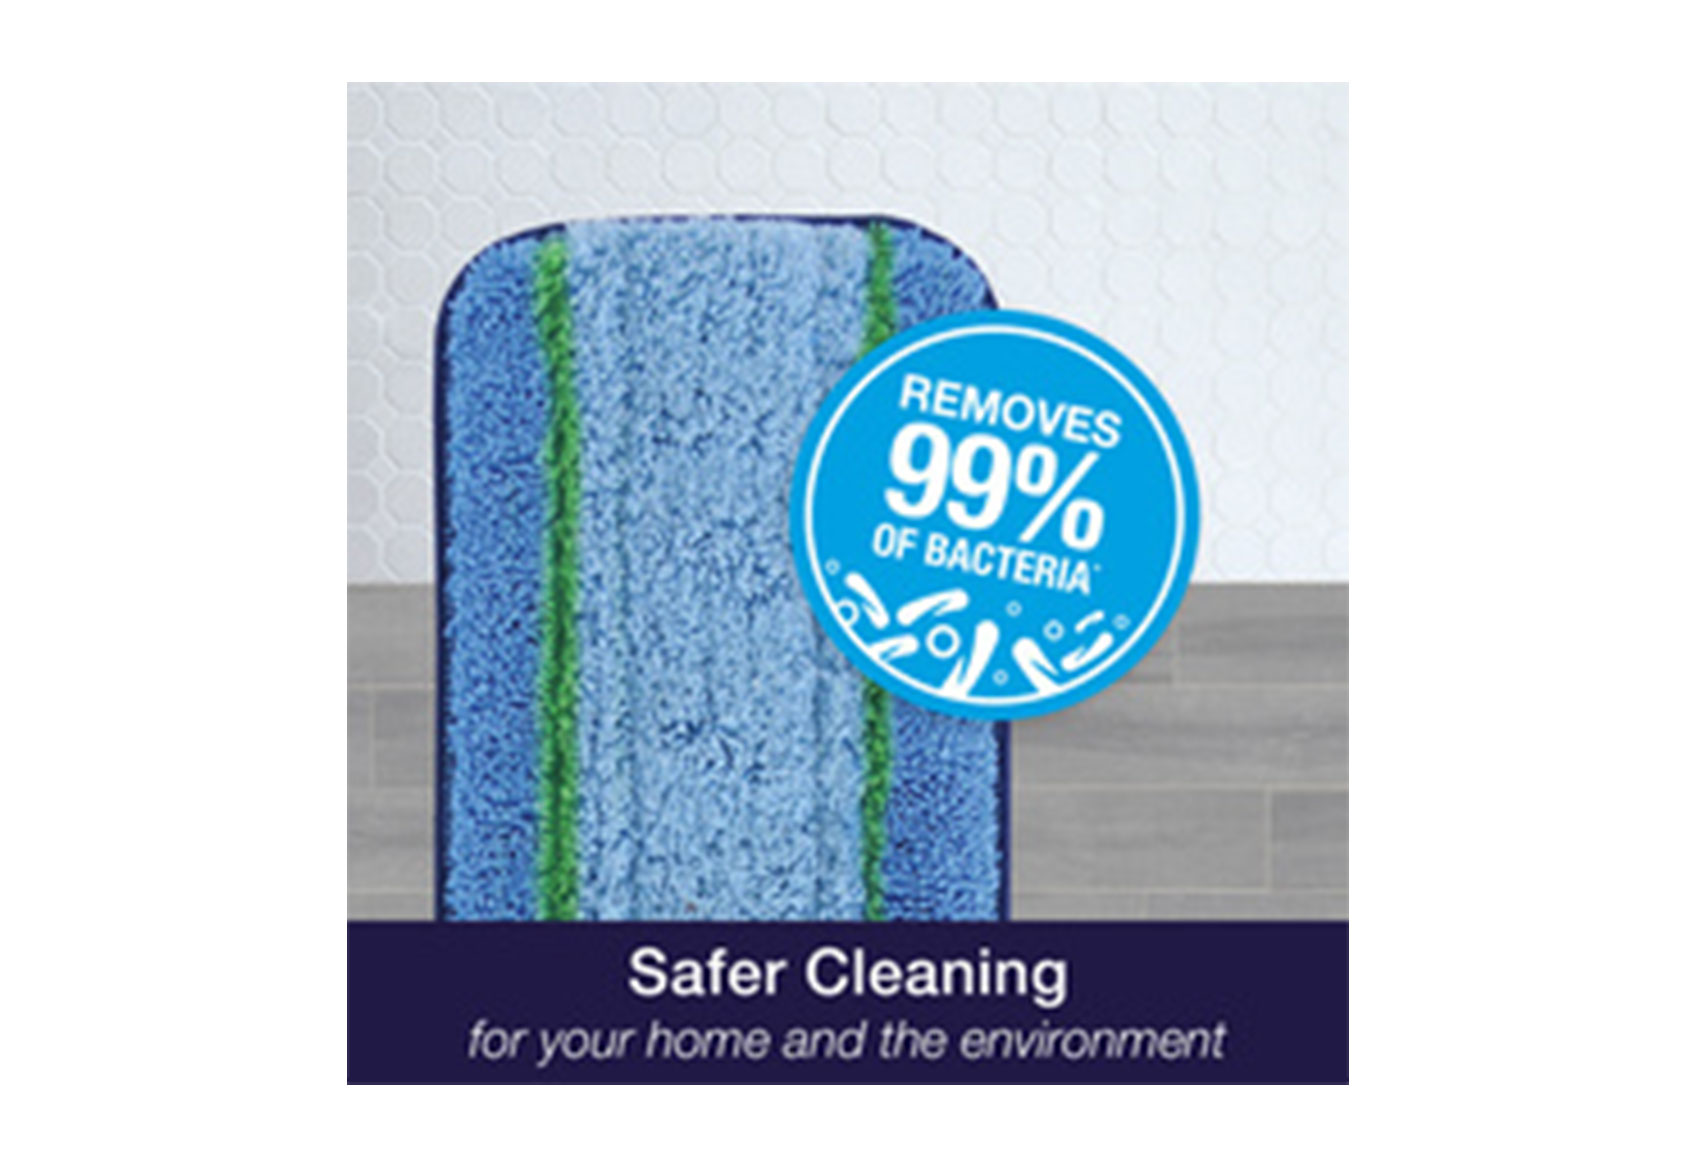 Microfiber Cleaning Pad - Safer Cleaning